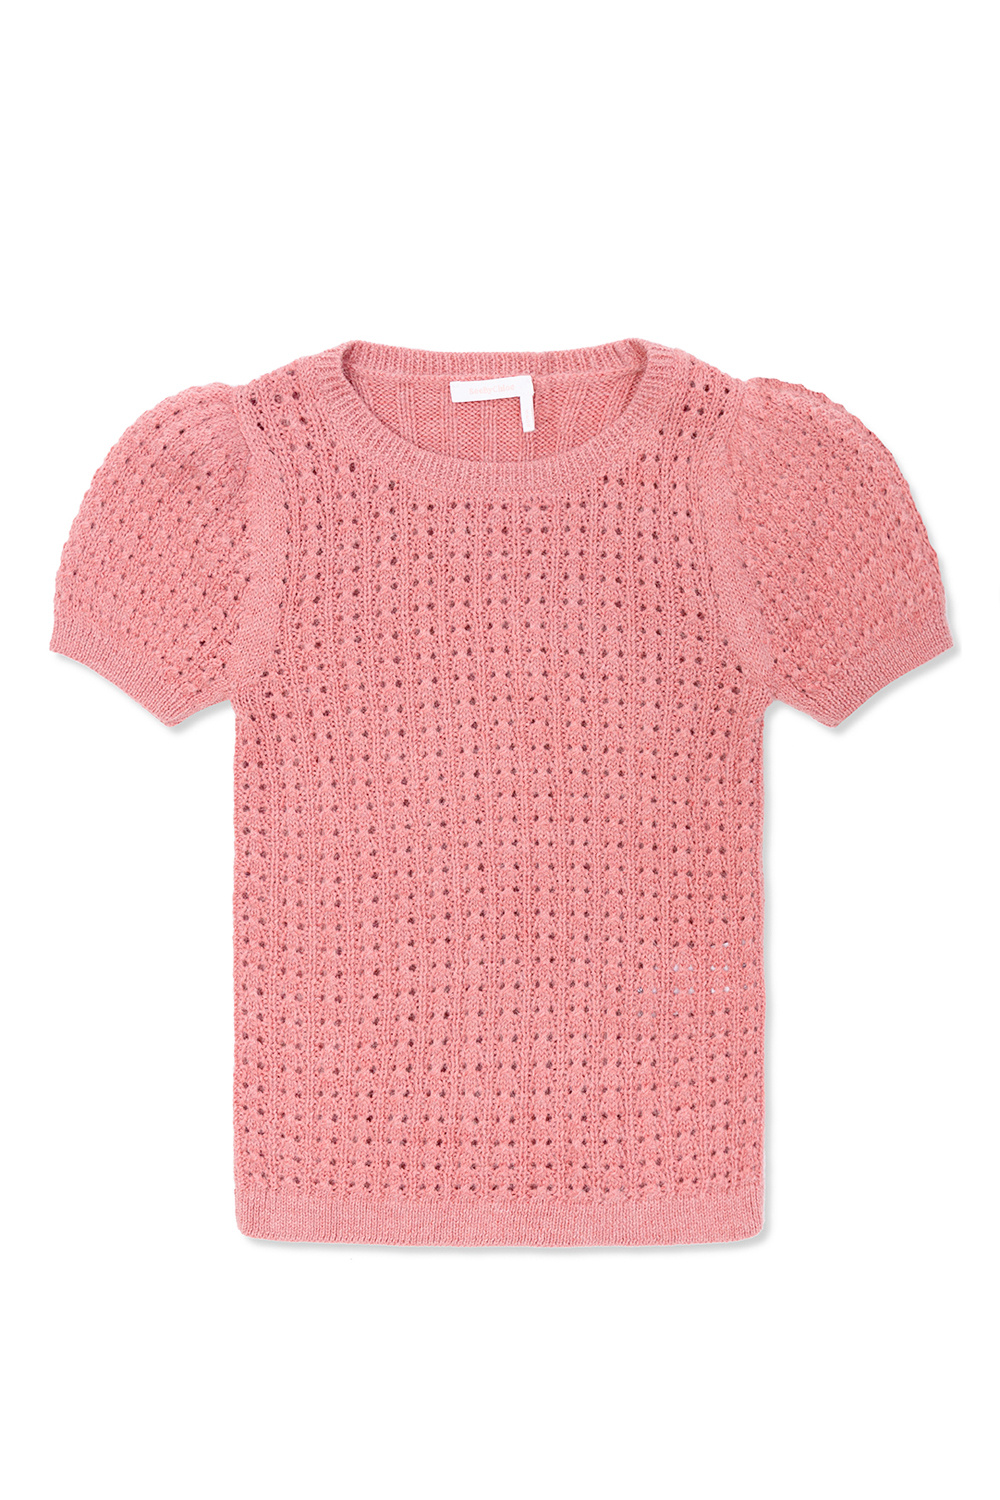 See By Chloé Sweater with Rylee sleeves